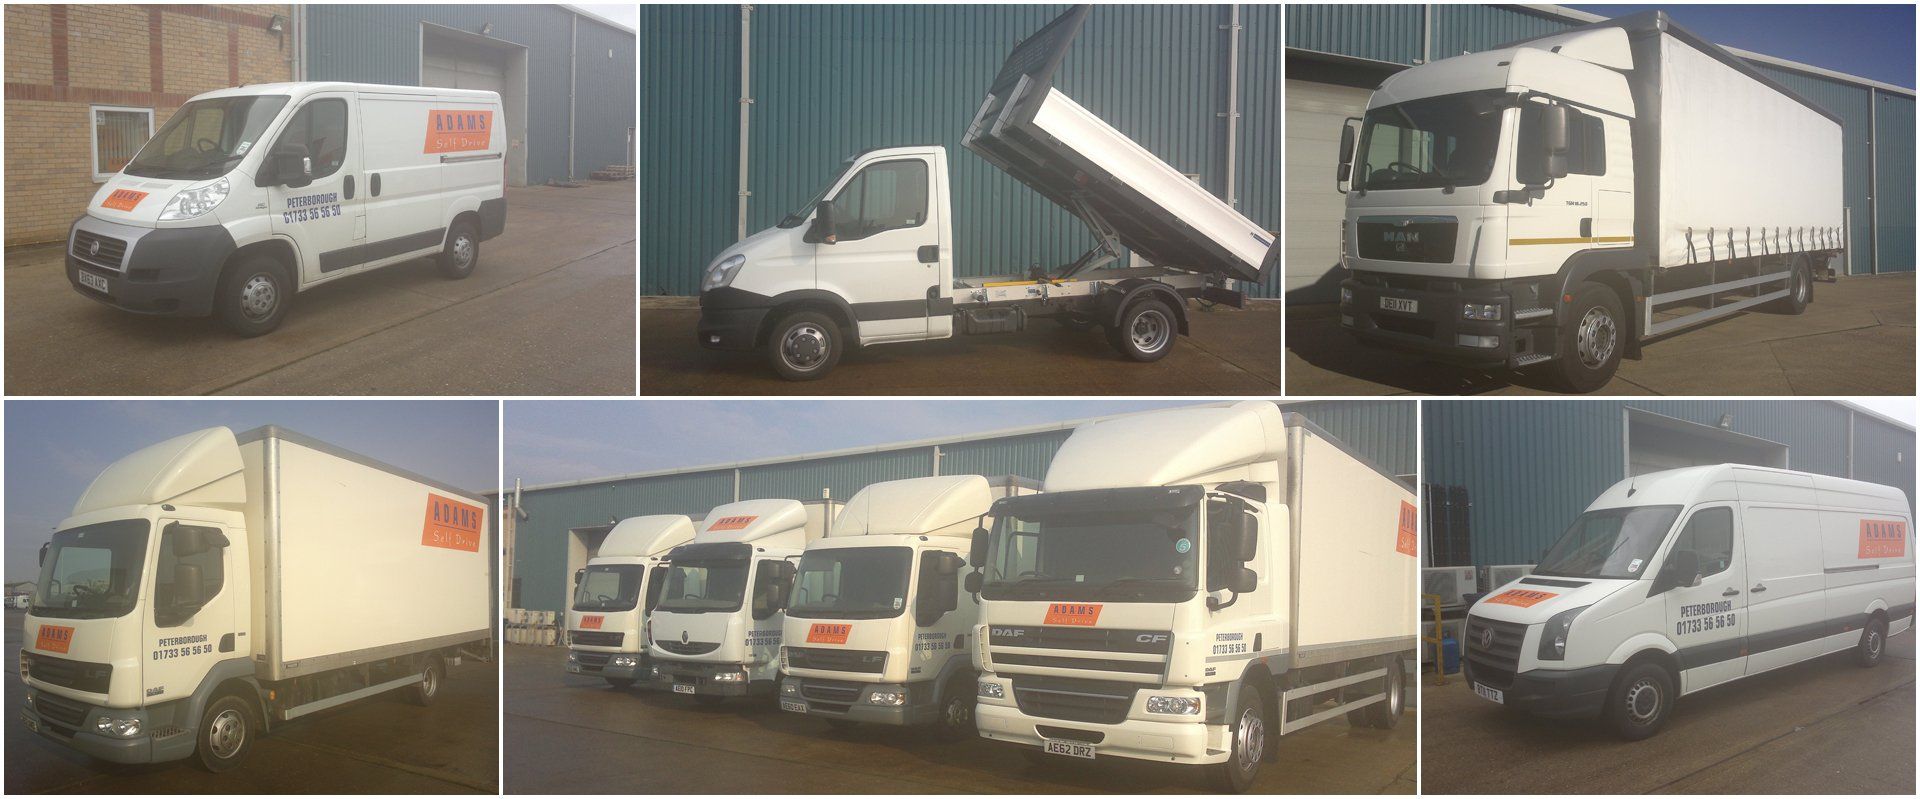 Commercial vehicles for hire